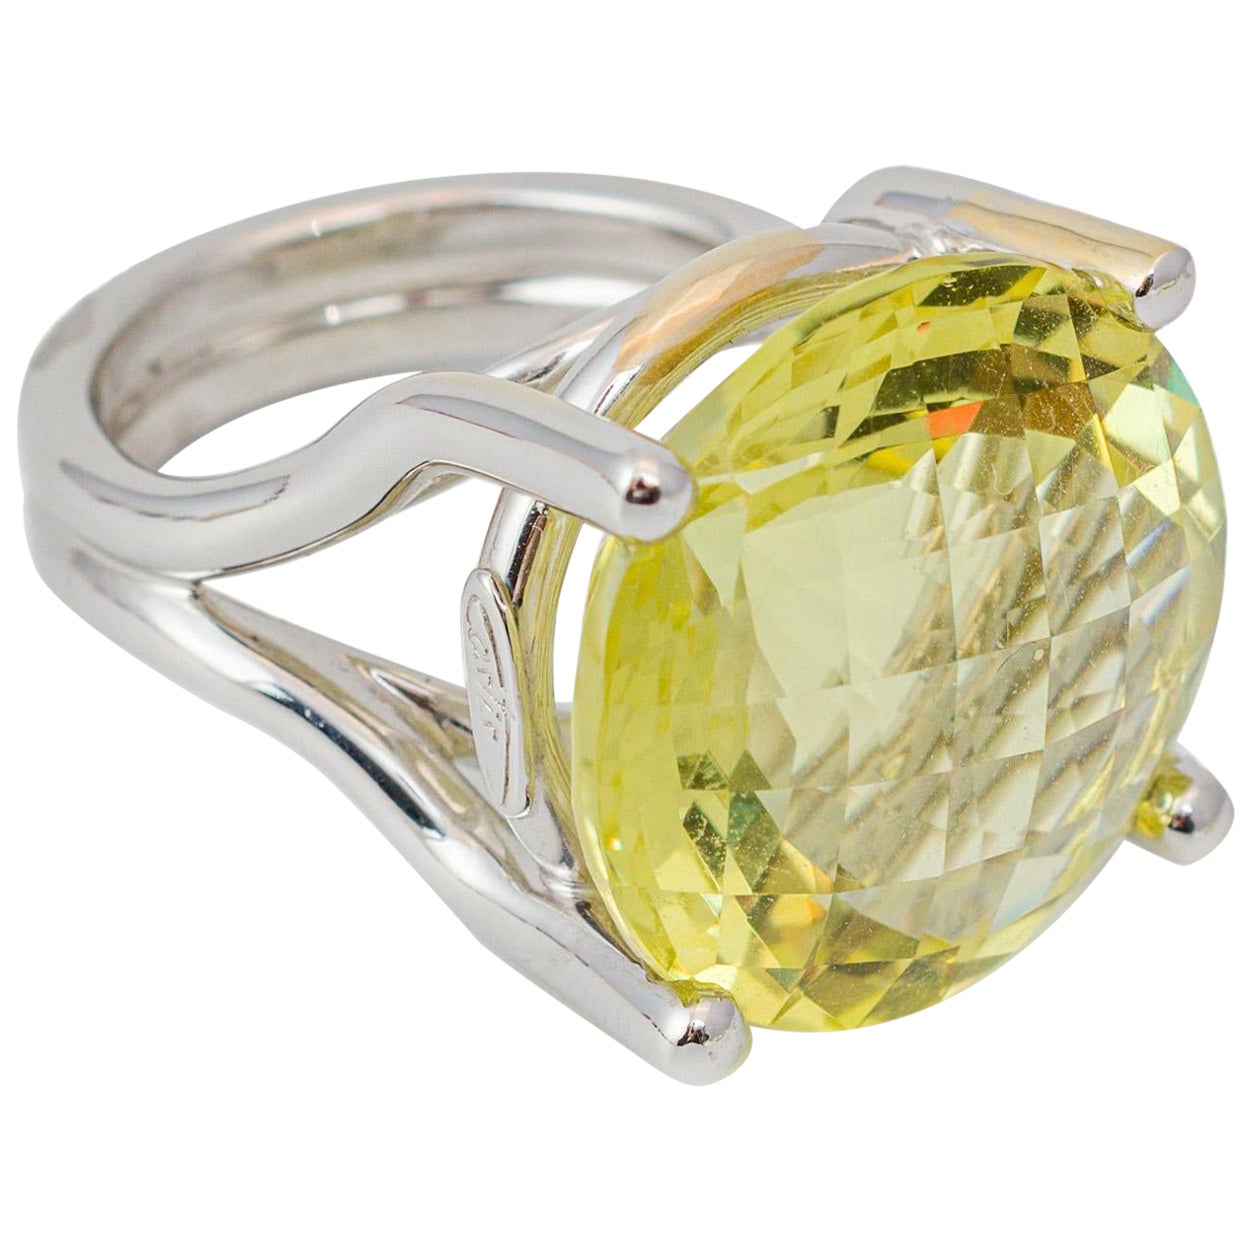 "Costis" Stone on Wire Ring with Round 26.30 carats Lemon Quartz For Sale